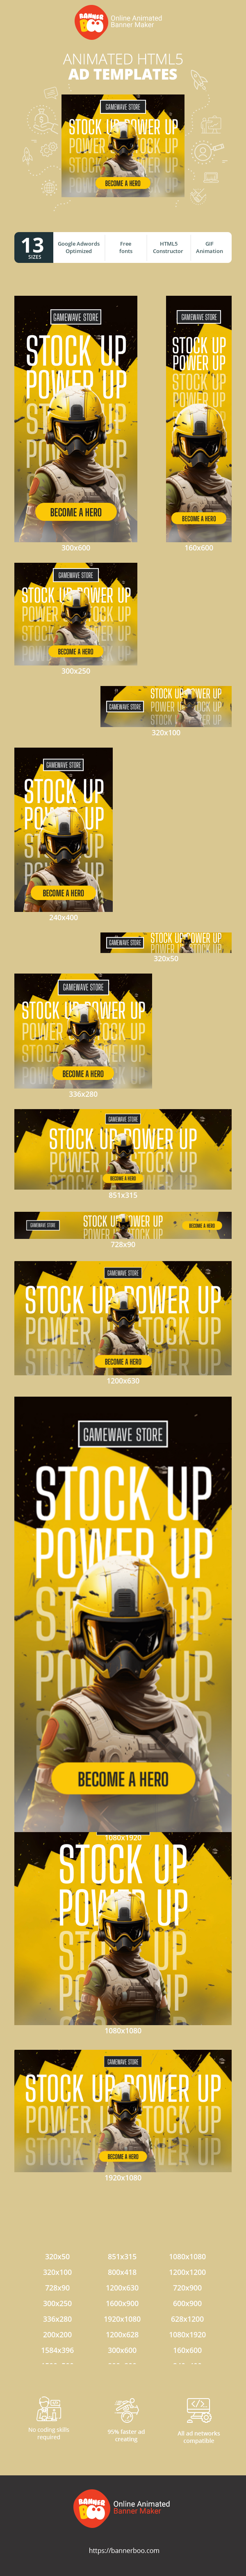 Banner ad template — Stock Up Power Up — Gaming